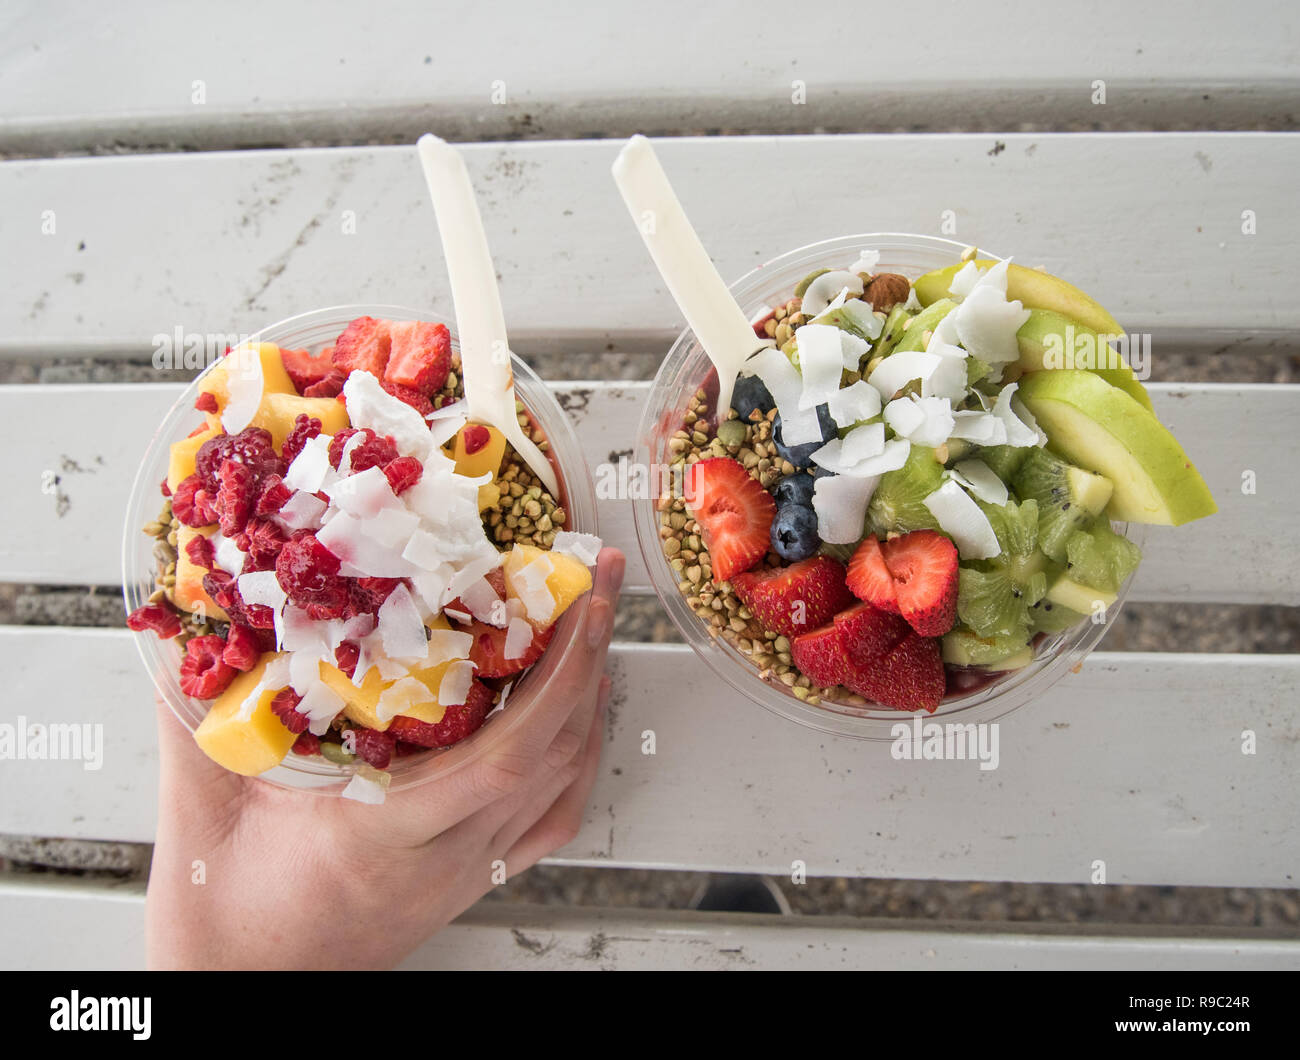 Bowl of acai and fruit healthy food on a bench ready to be eaten. Stock Photo